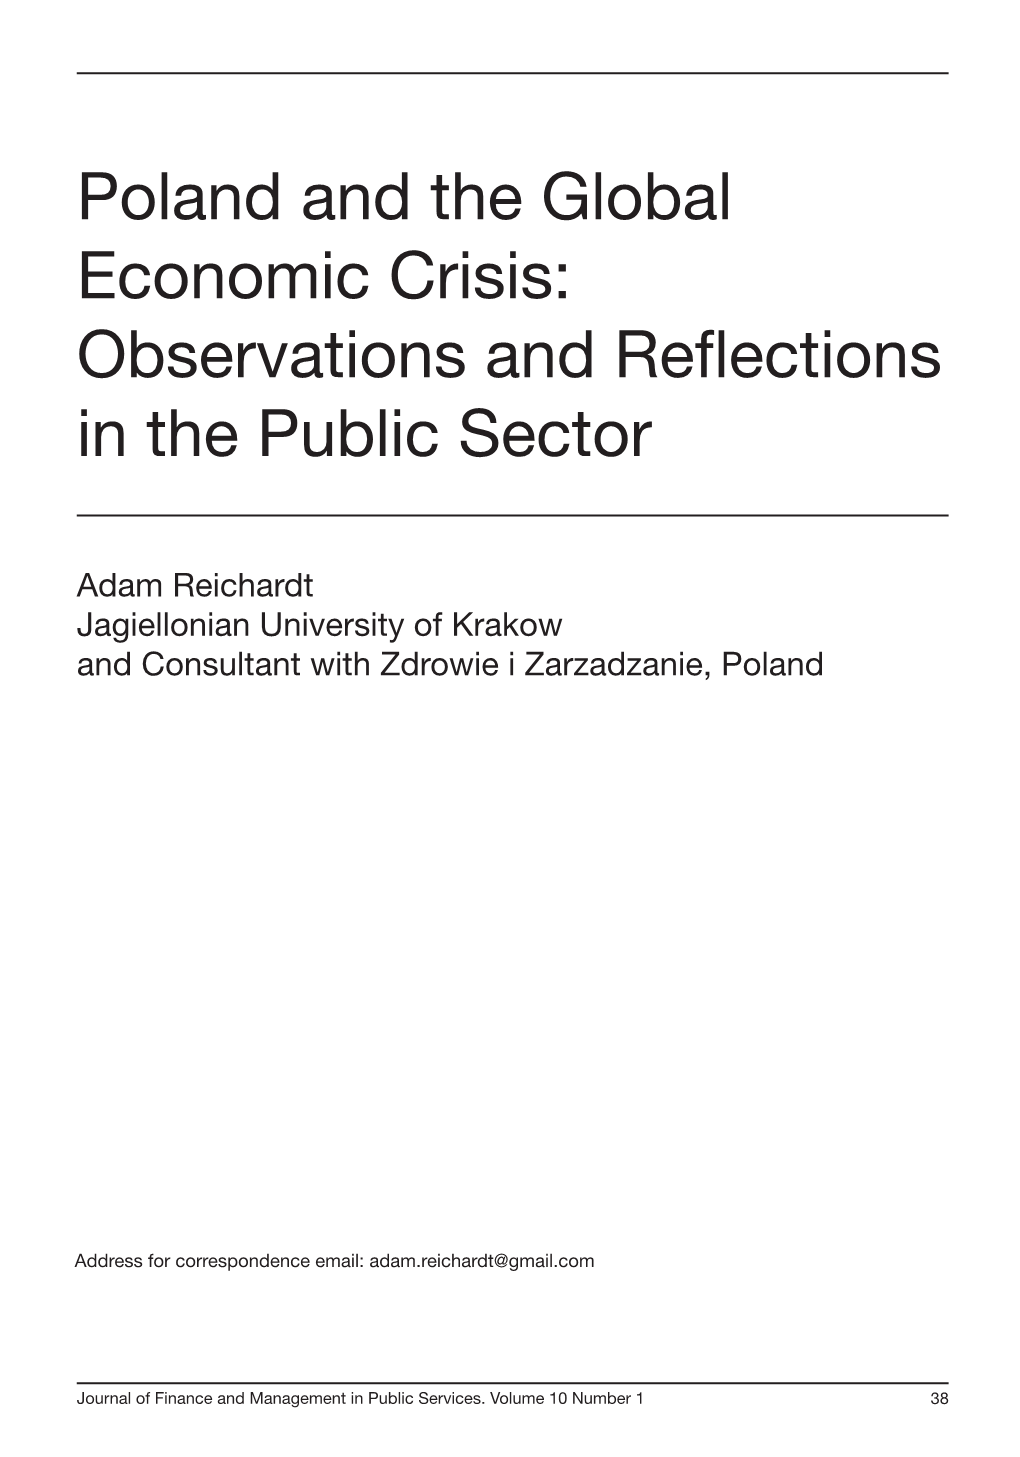 Poland and the Global Economic Crisis: Observations and Reflections in the Public Sector